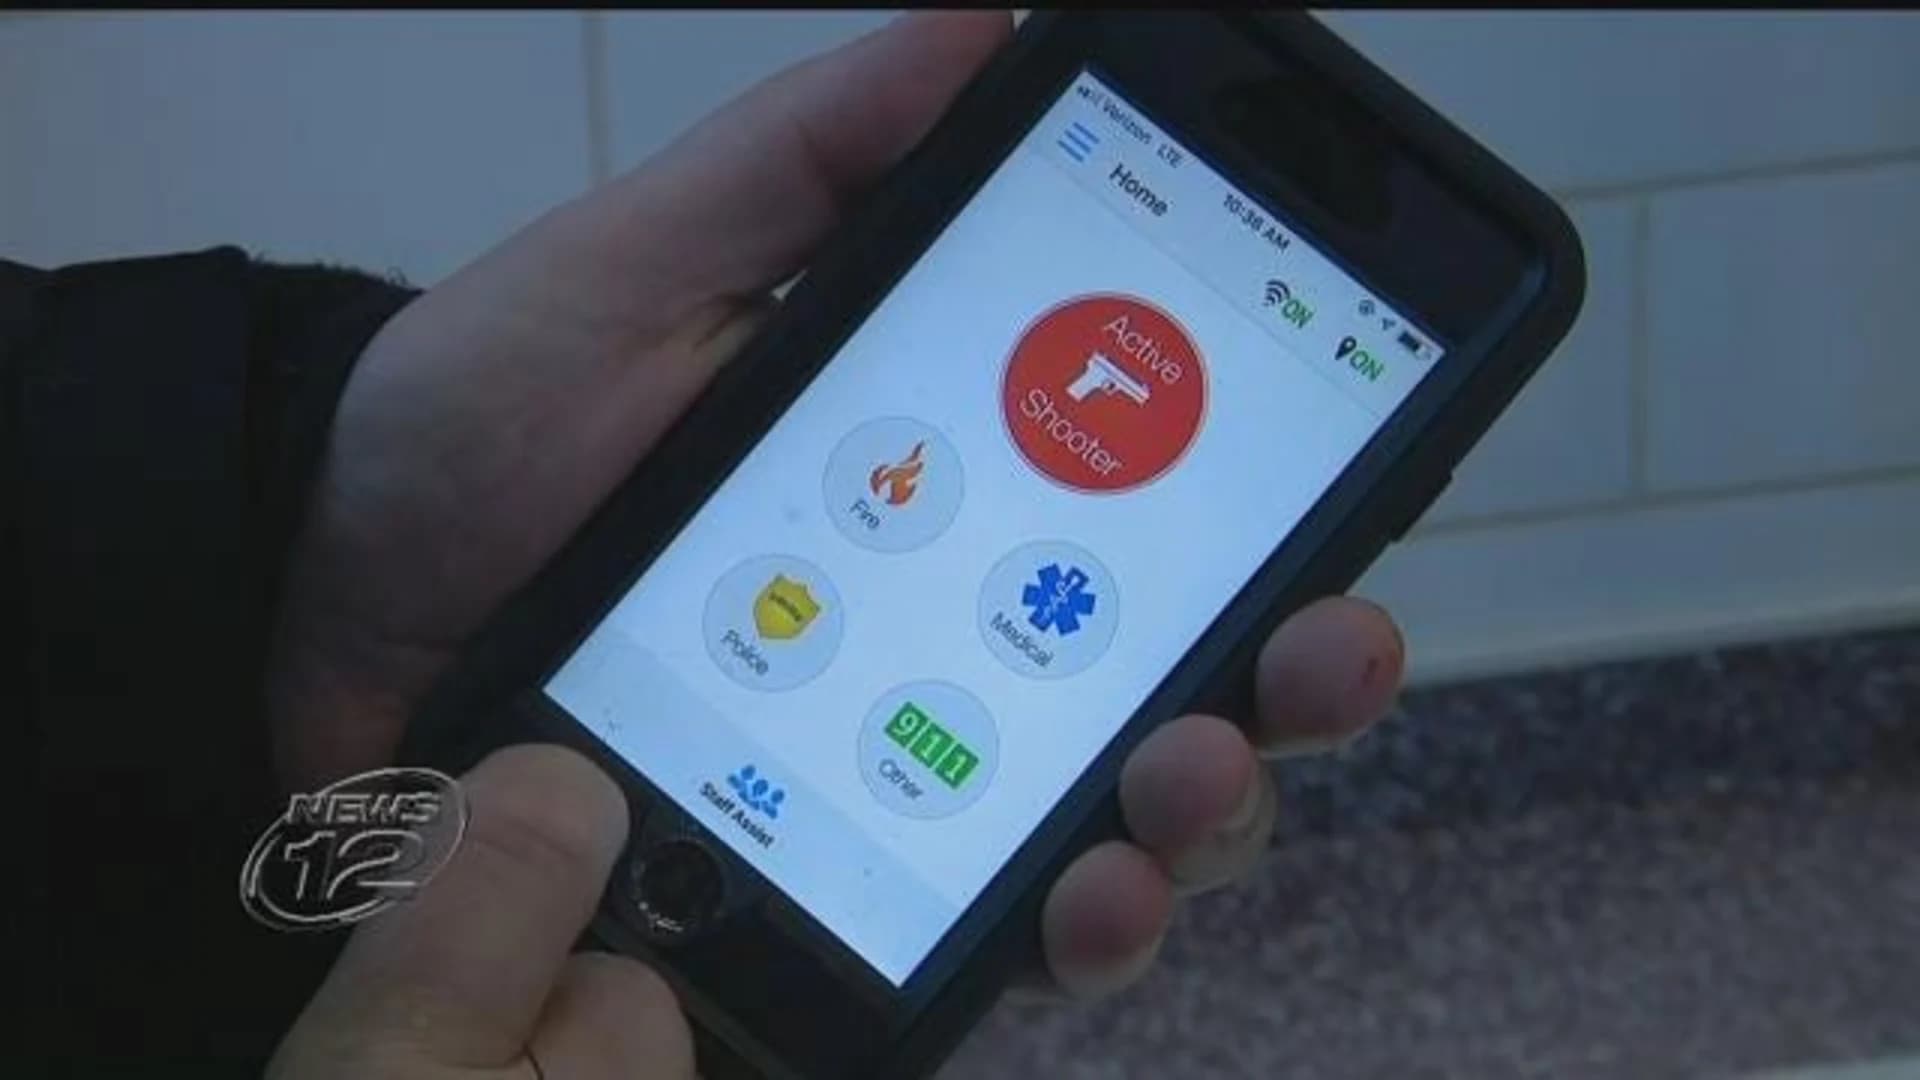 Kings Park School District is 1st in county to get RAVE Panic Button app